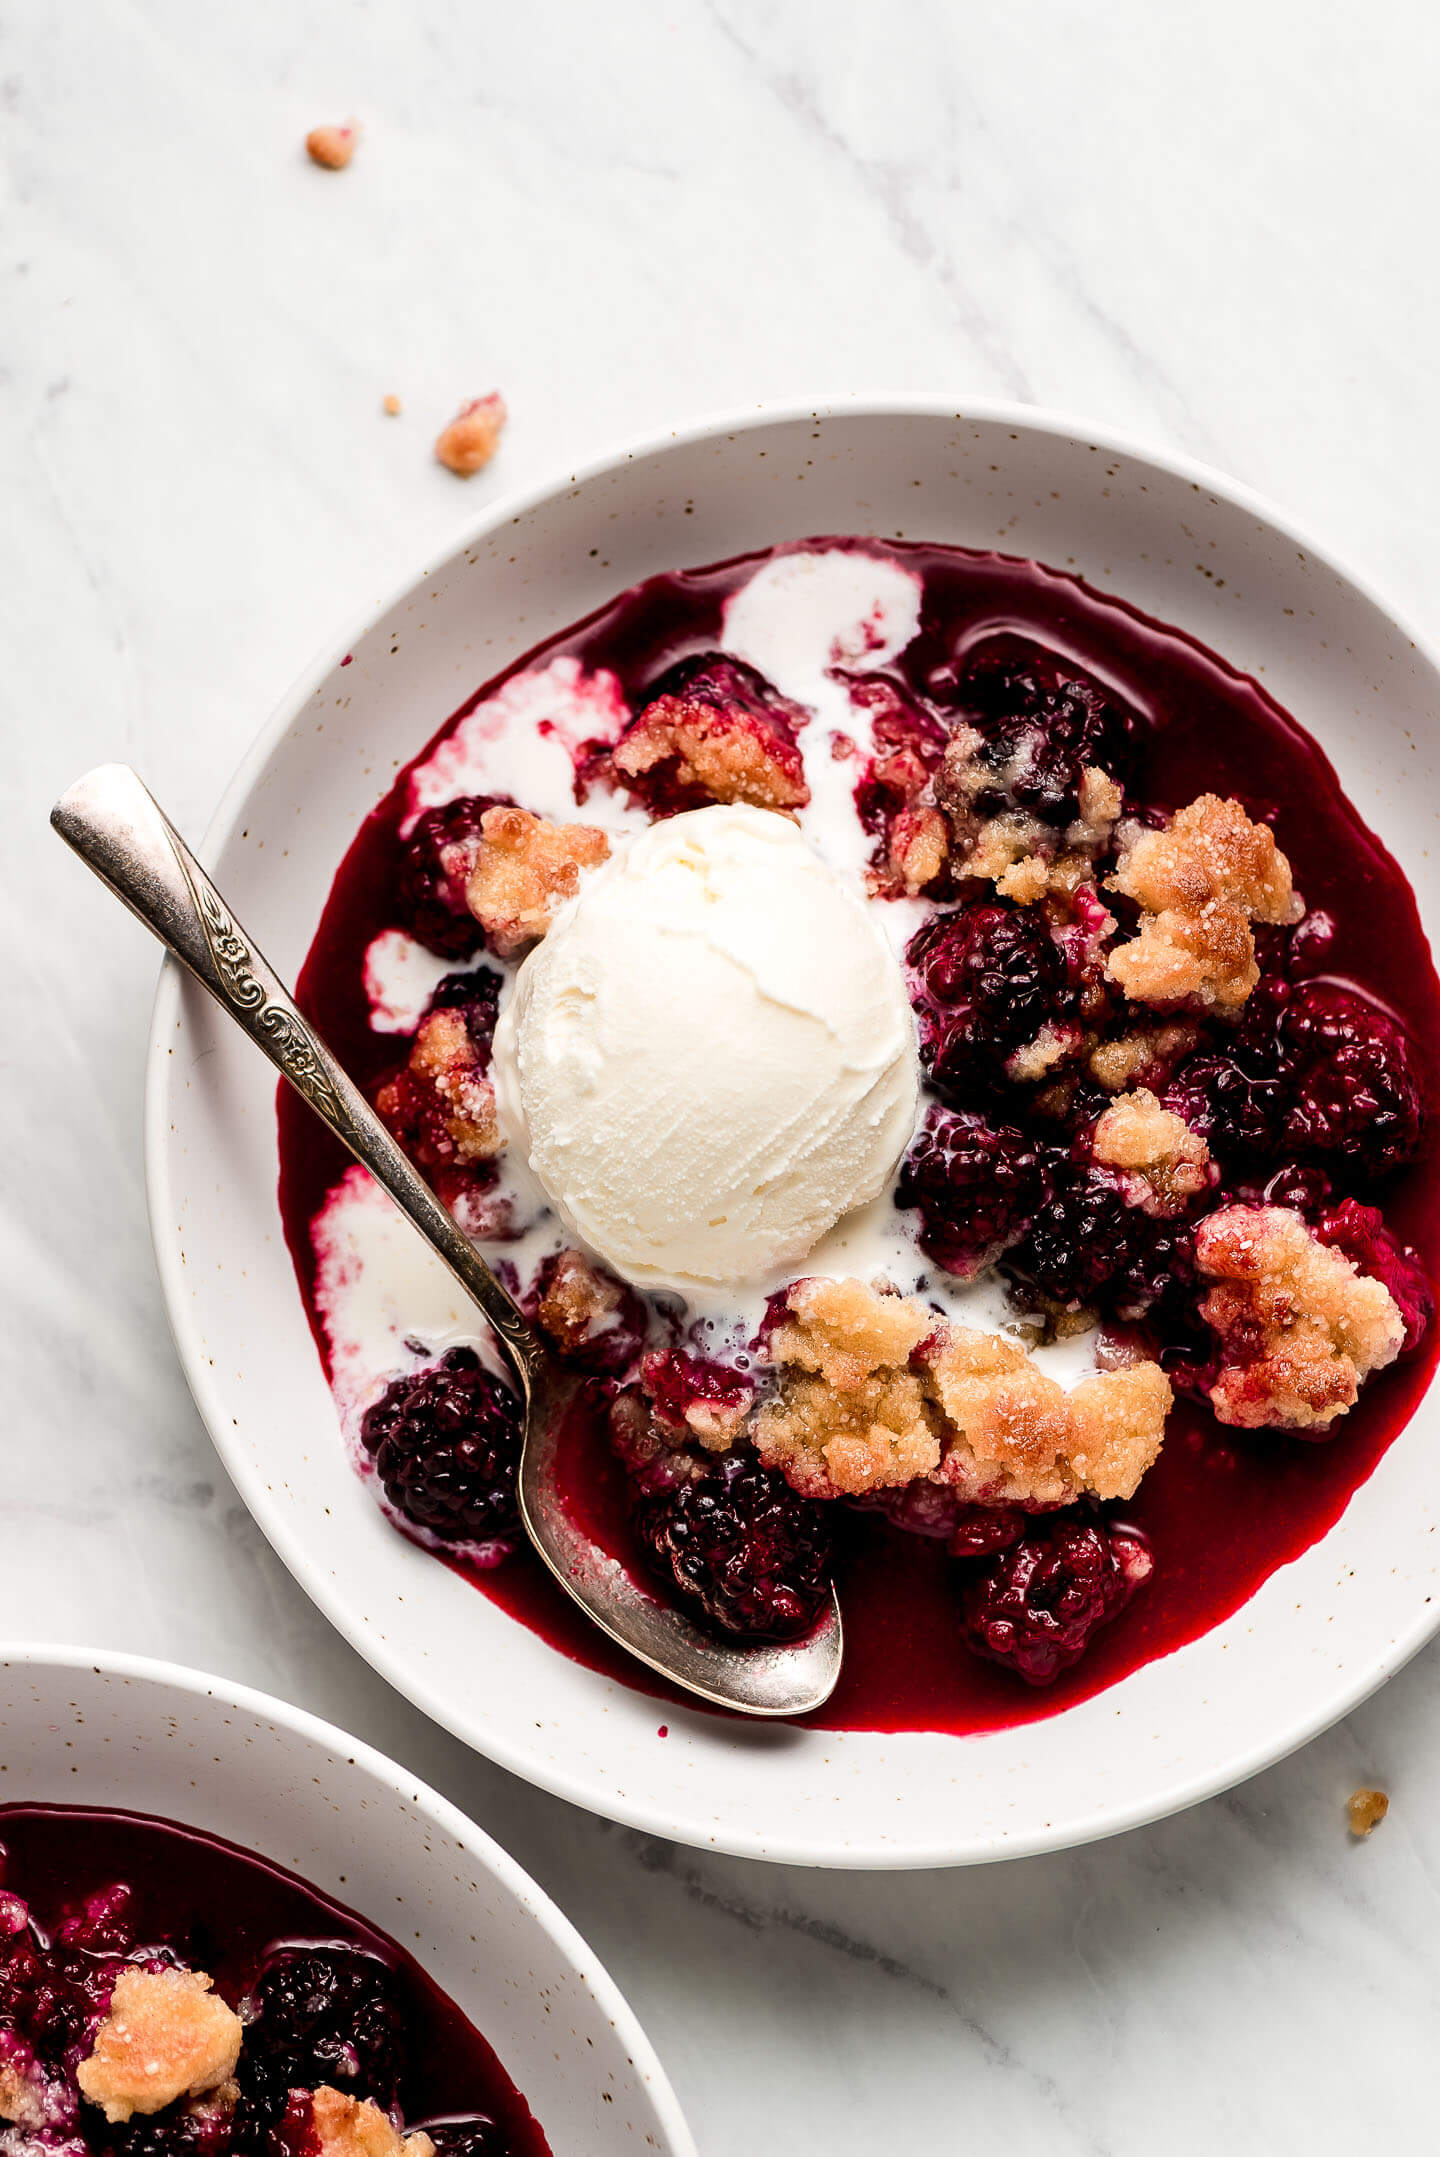 Blackberry Cobbler in a bowl topped with ice cream that is starting to melt.